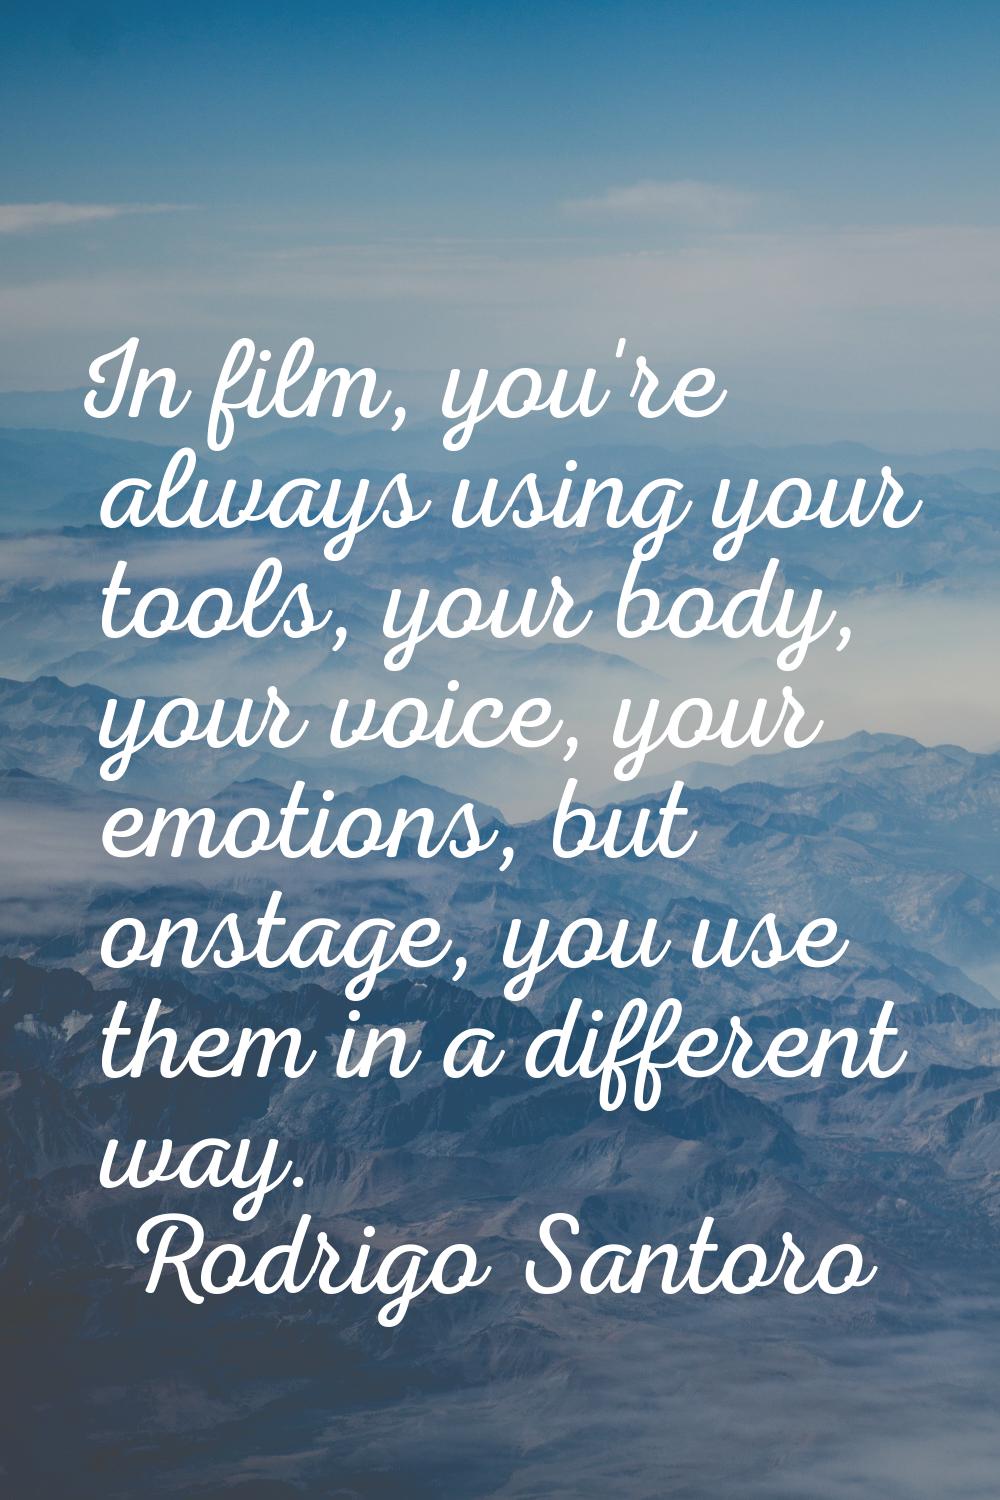 In film, you're always using your tools, your body, your voice, your emotions, but onstage, you use